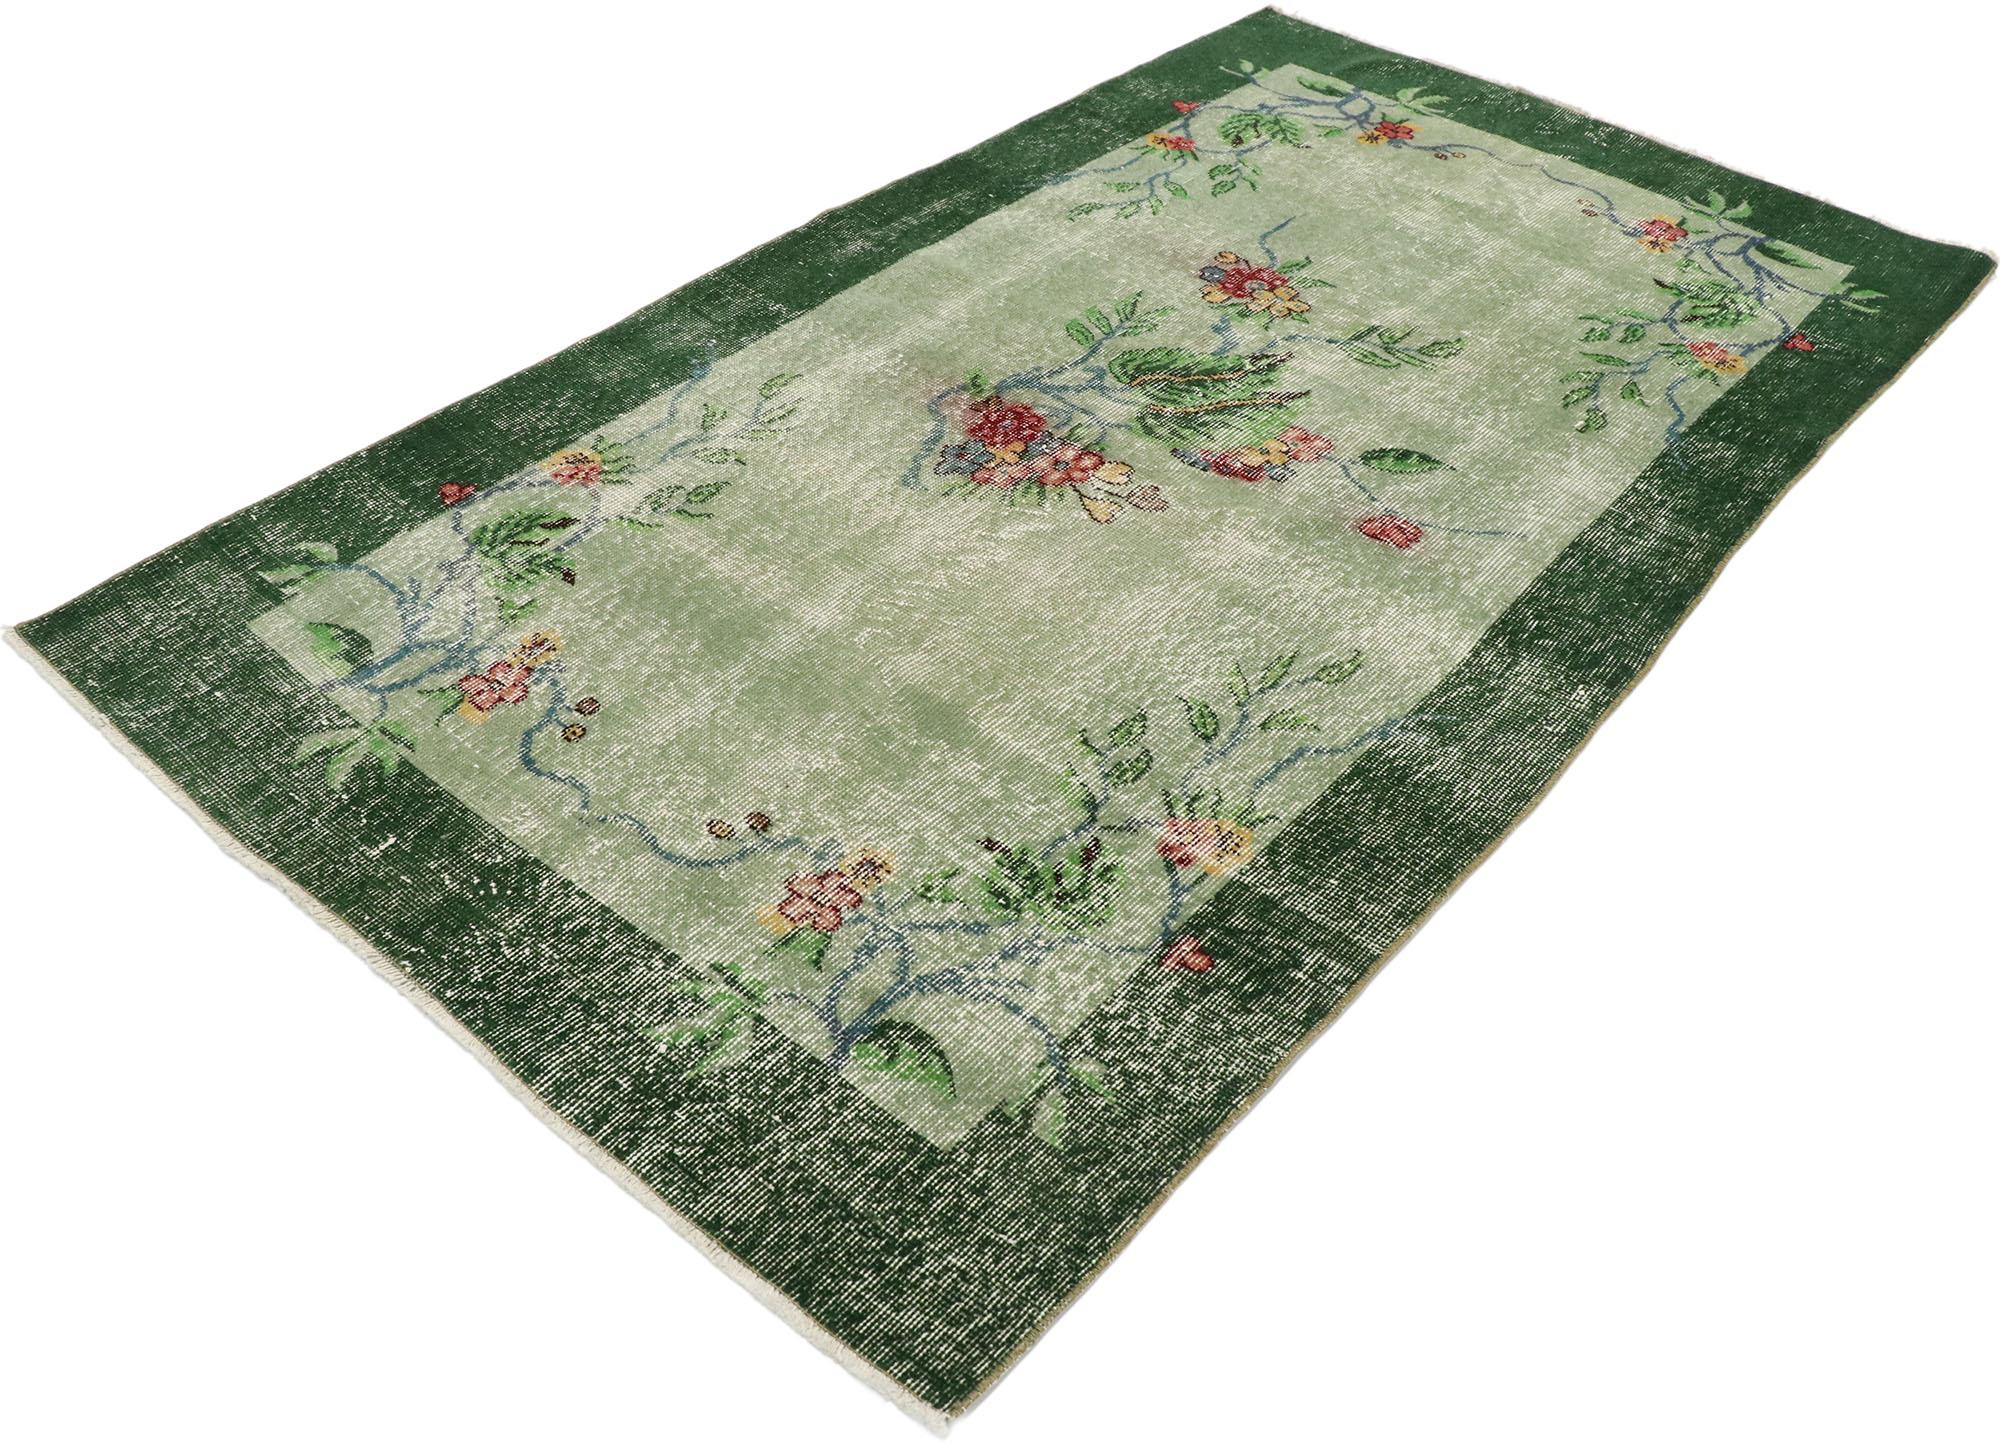 53373, distressed vintage Turkish Sivas rug with romantic Hollywood Regency style. This hand knotted wool distressed vintage Turkish Sivas rug features a color blocked plain field and border festooned with gorgeous floral motifs. A large spray of